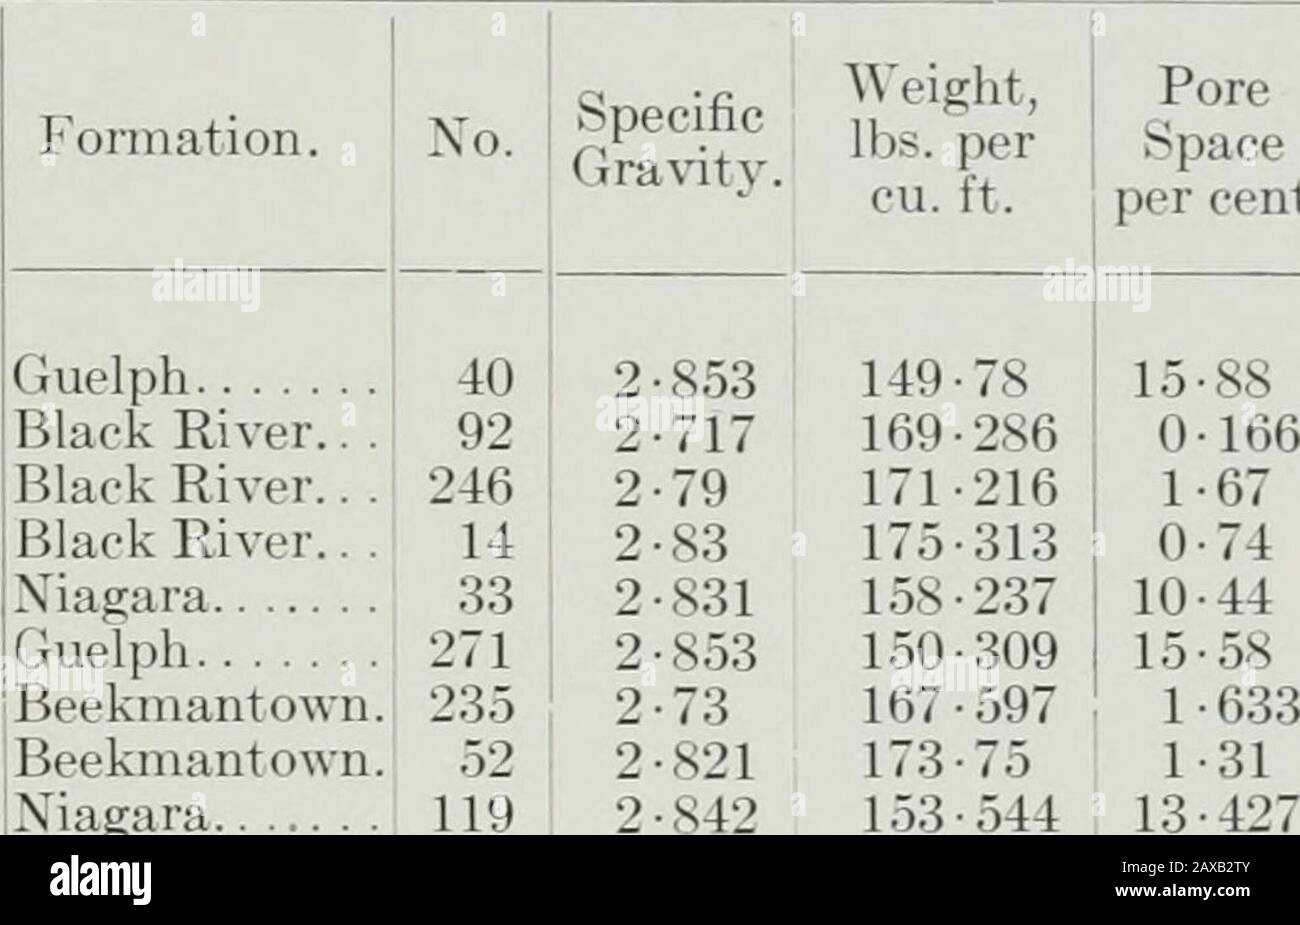 ..Report on the building and ornamental stones of Canada, volI-V . 349 APPENDIX I. TABLE I. The Specific Gravity, Weight Per Cubic Foot, Percentage of Pore Space,and Ratio of Absorption of Ontario Building Stones. LIMESTONES.. Pore j Ratio Space of Ab- per cent, sorption. Ashenhurst, Erin Aylesworth, Newliurgh Brennan, Sand Point Britnell, Burnt river Cook, Wiarton Central Prison, Guelph .... Coughlin, Smiths Fall^ Dyer, Brockville Gibson, Beams^^lle Longford Quarry, bottom 14 in. bed . Longford Quarry, top 9 in. bed . Macdonald, Point Anne, light blue l)ed McEwen, Carleton Place . .McPhie, Gl Stock Photo